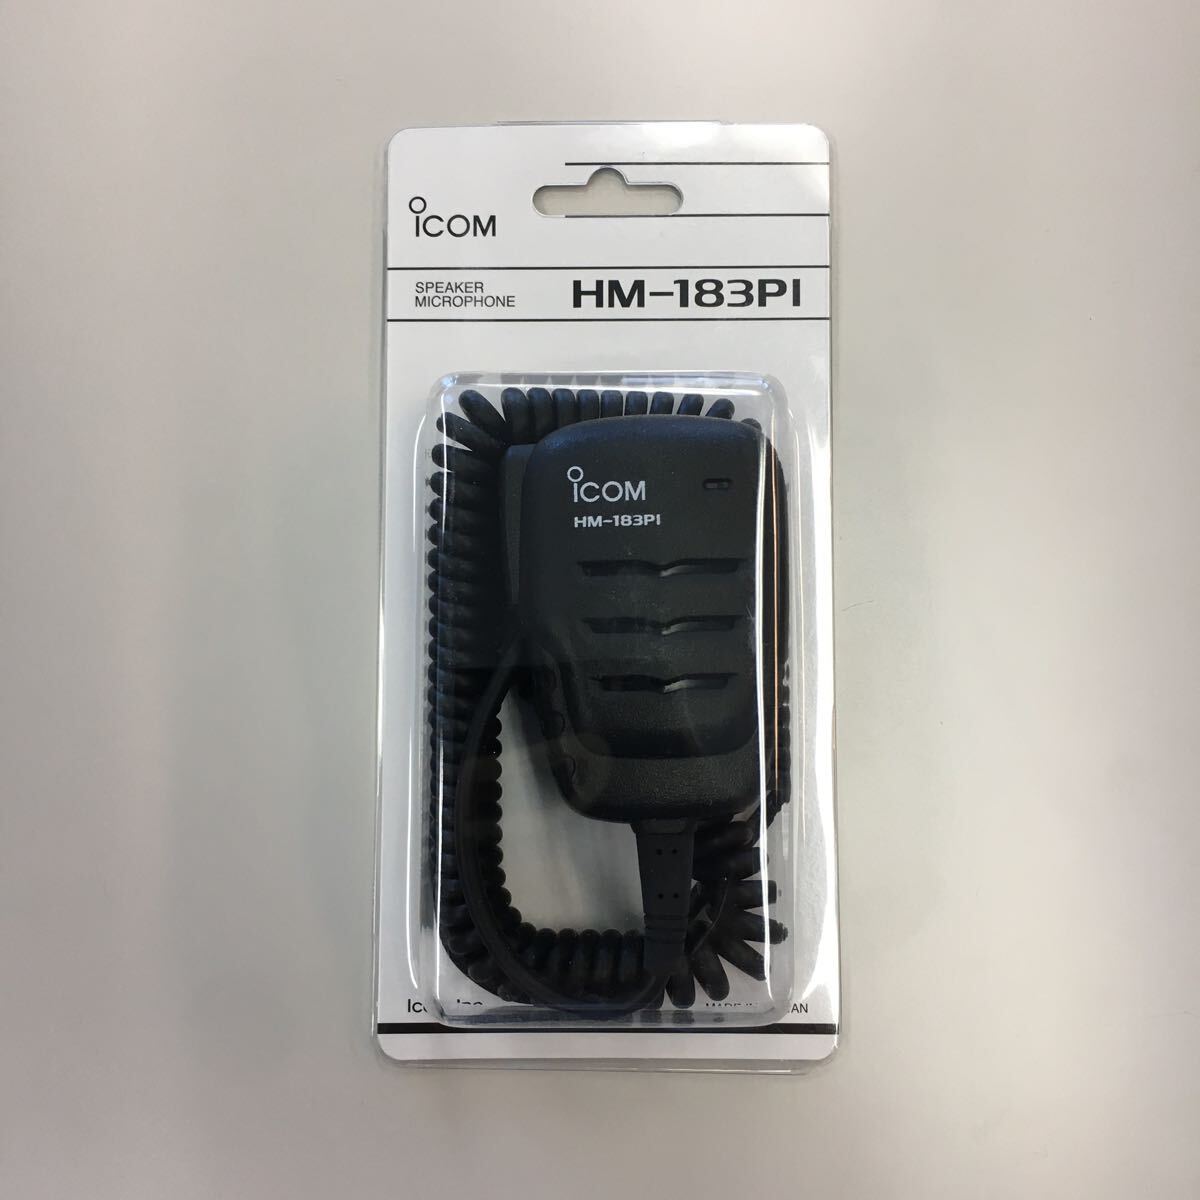  new goods unused unopened full set ICOM transceiver microphone 2. charger charge code charge battery IC-4300 Icom 1 jpy start 